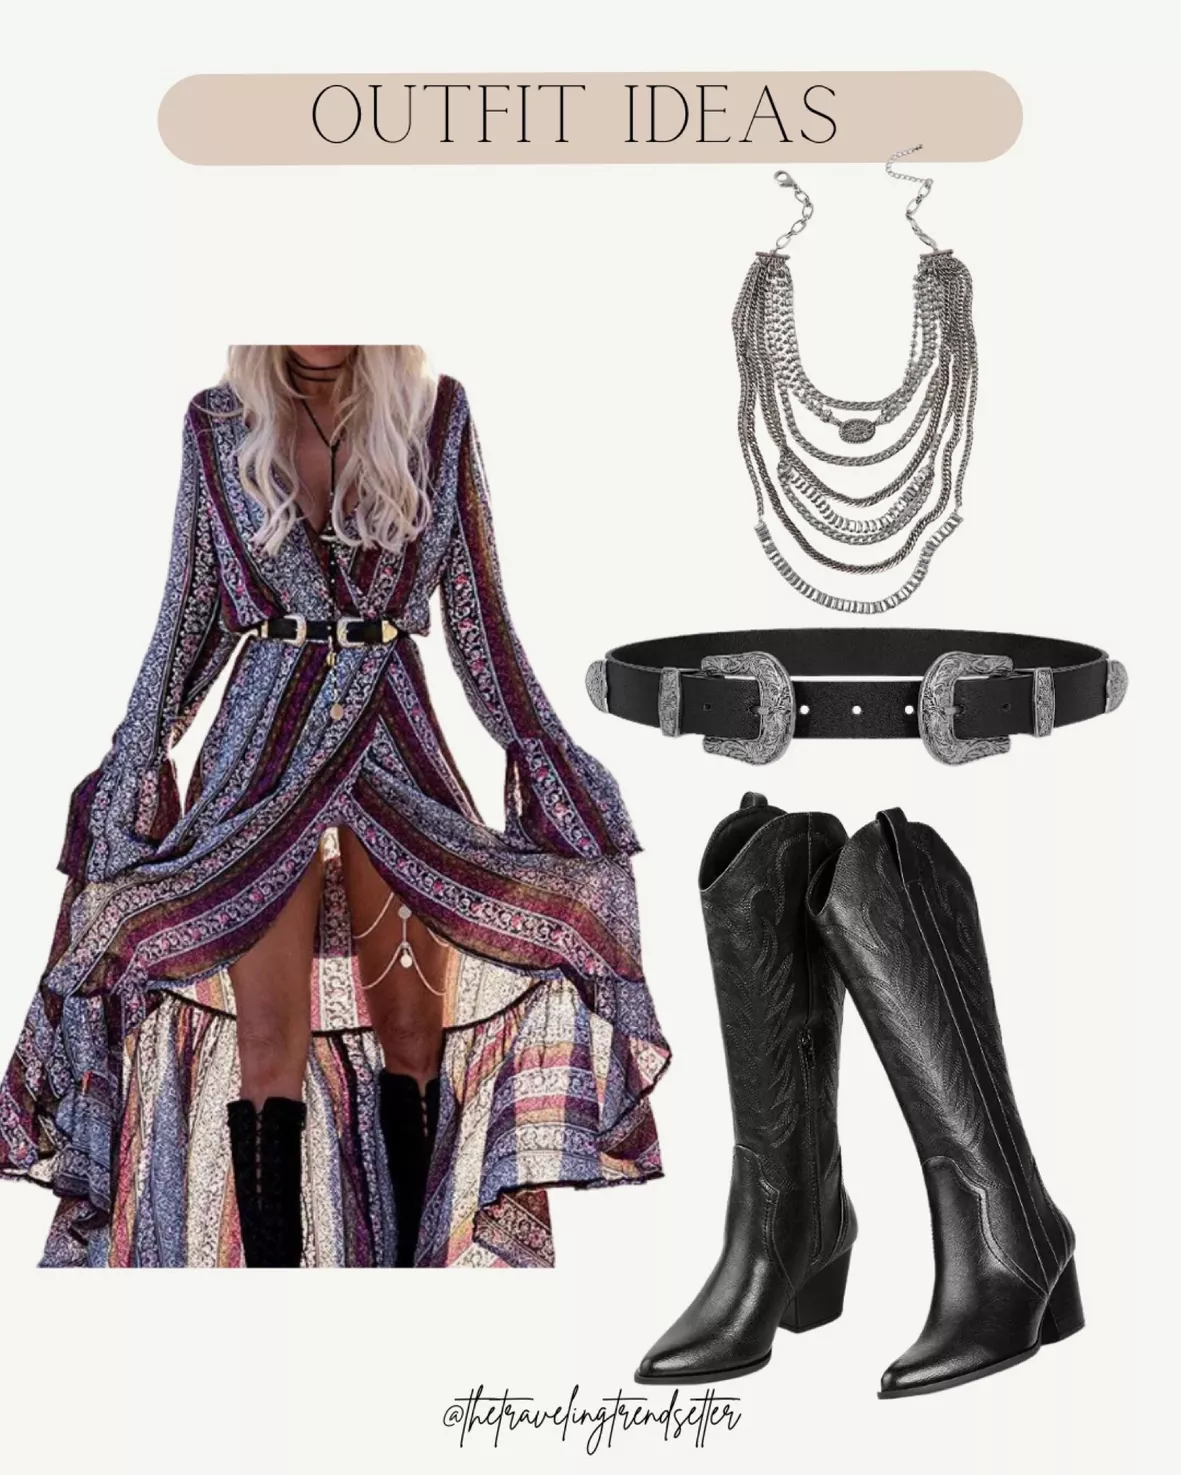 recent western outfit inspo #fallwesternoutfits #nfroutfitinspo